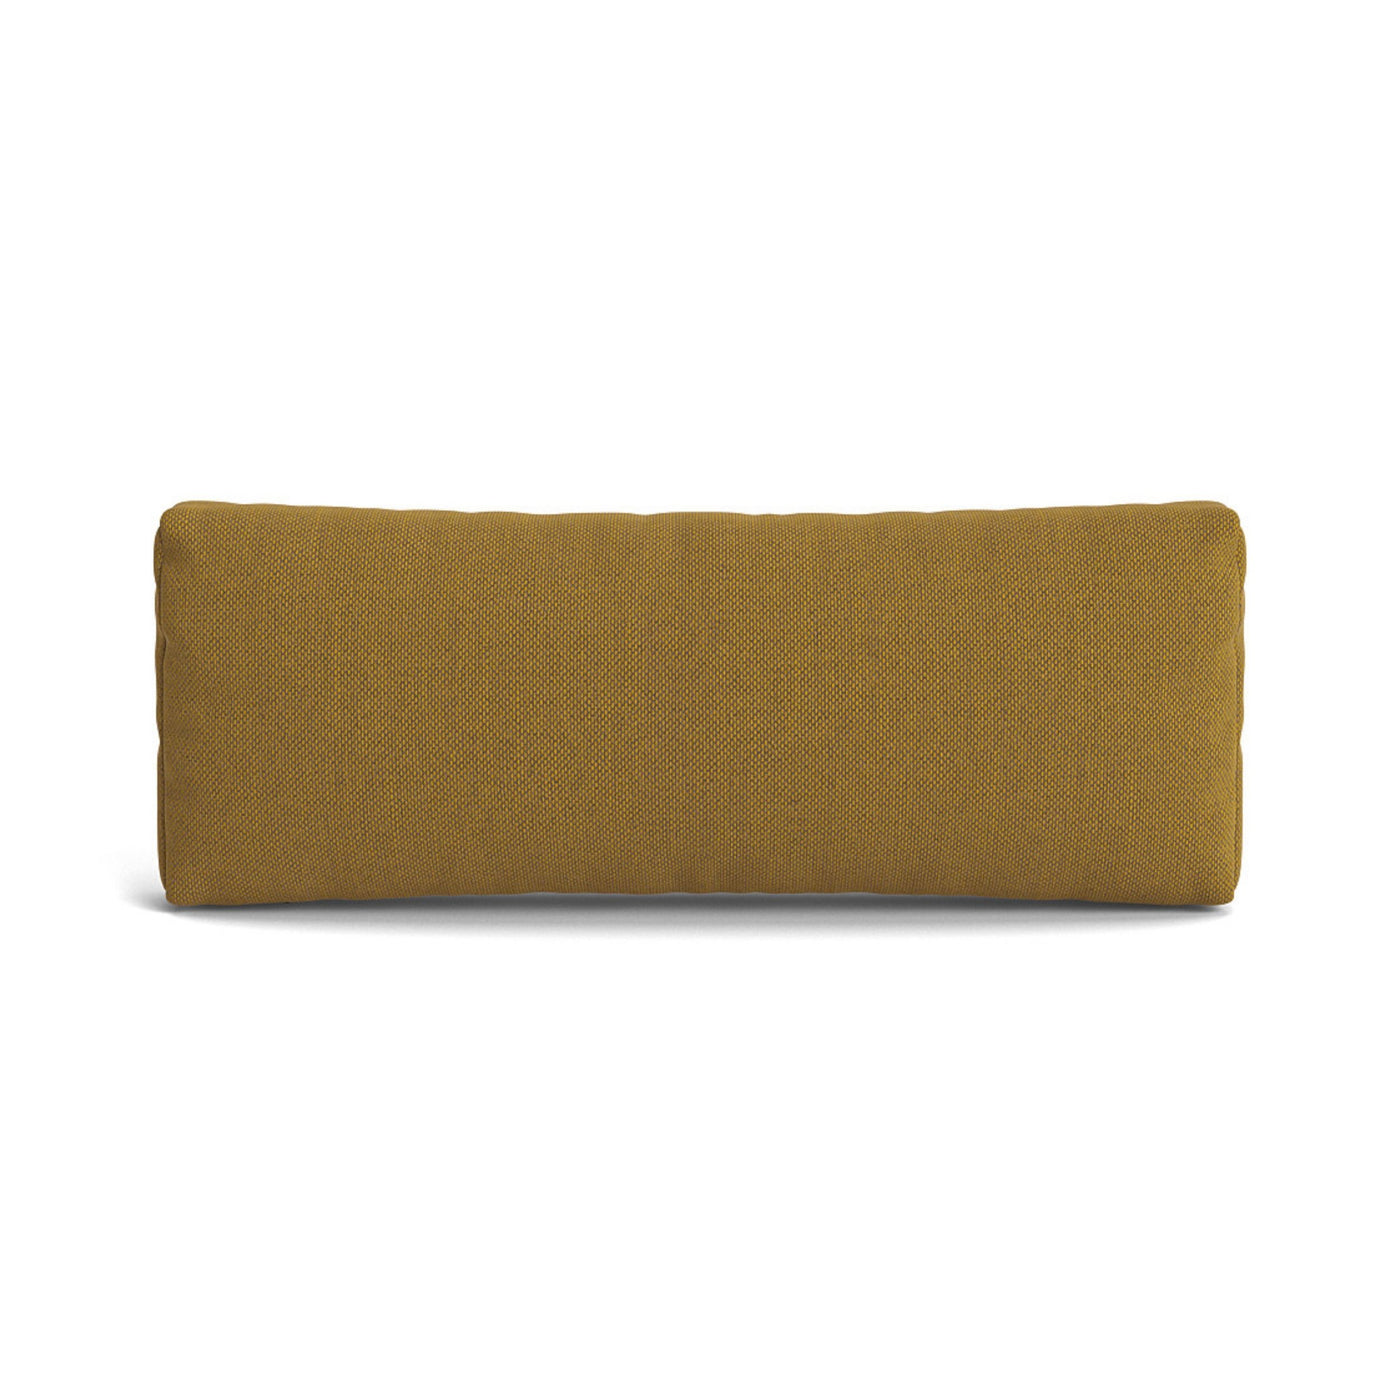 Muuto Connect Soft Modular Sofa Cushion. Shop online at someday designs. #colour_re-wool-448